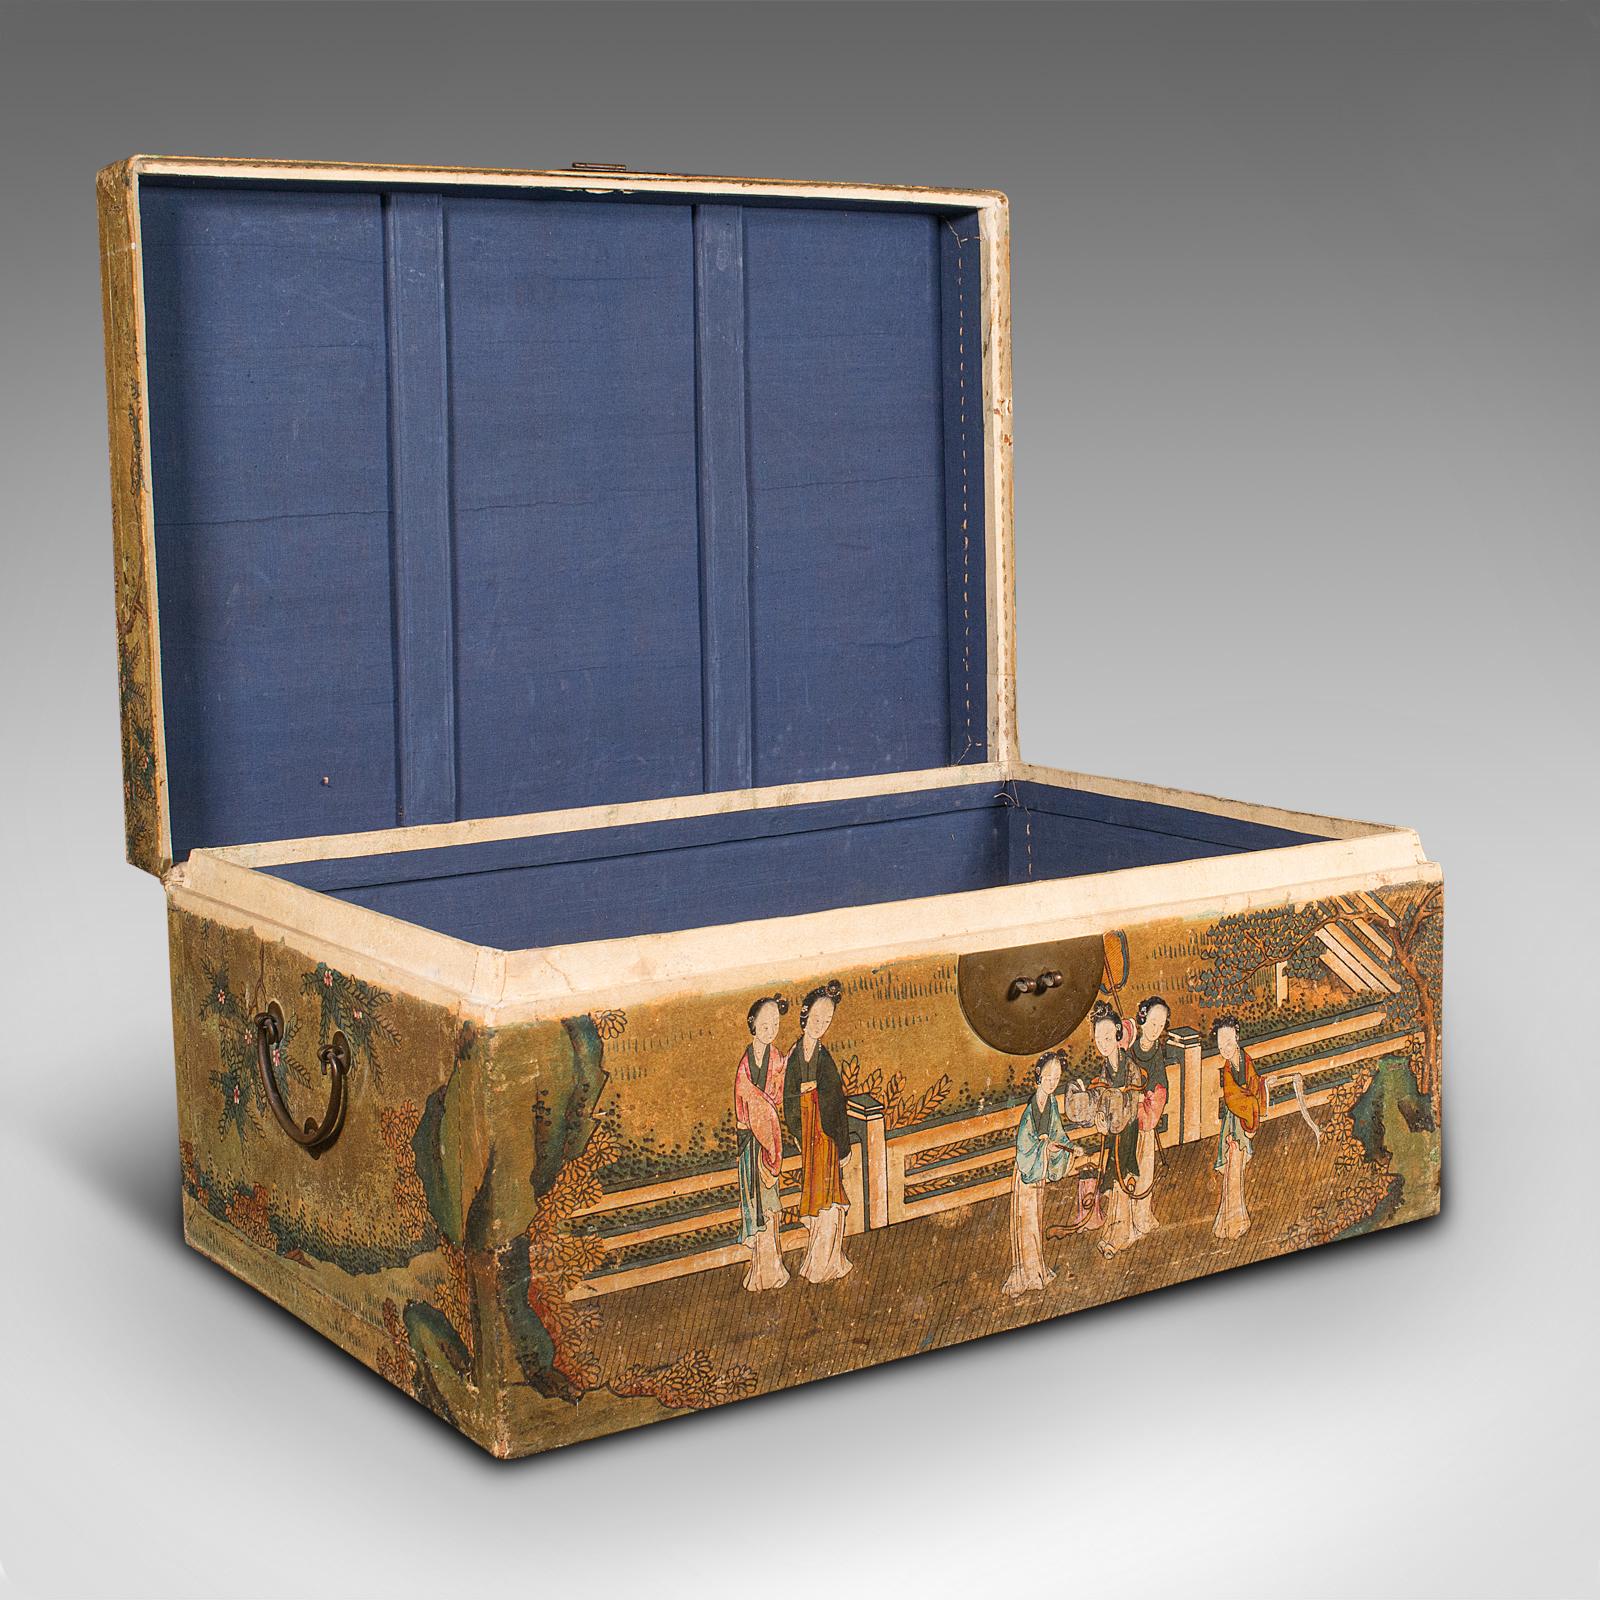 This is an antique robe chest. A Japanese, papered storage trunk with oriental Art Deco taste, dating to the early 20th century, circa 1920.

Wonderfully hand-painted, decorative storage box with superb detail
Displays a desirable aged patina and